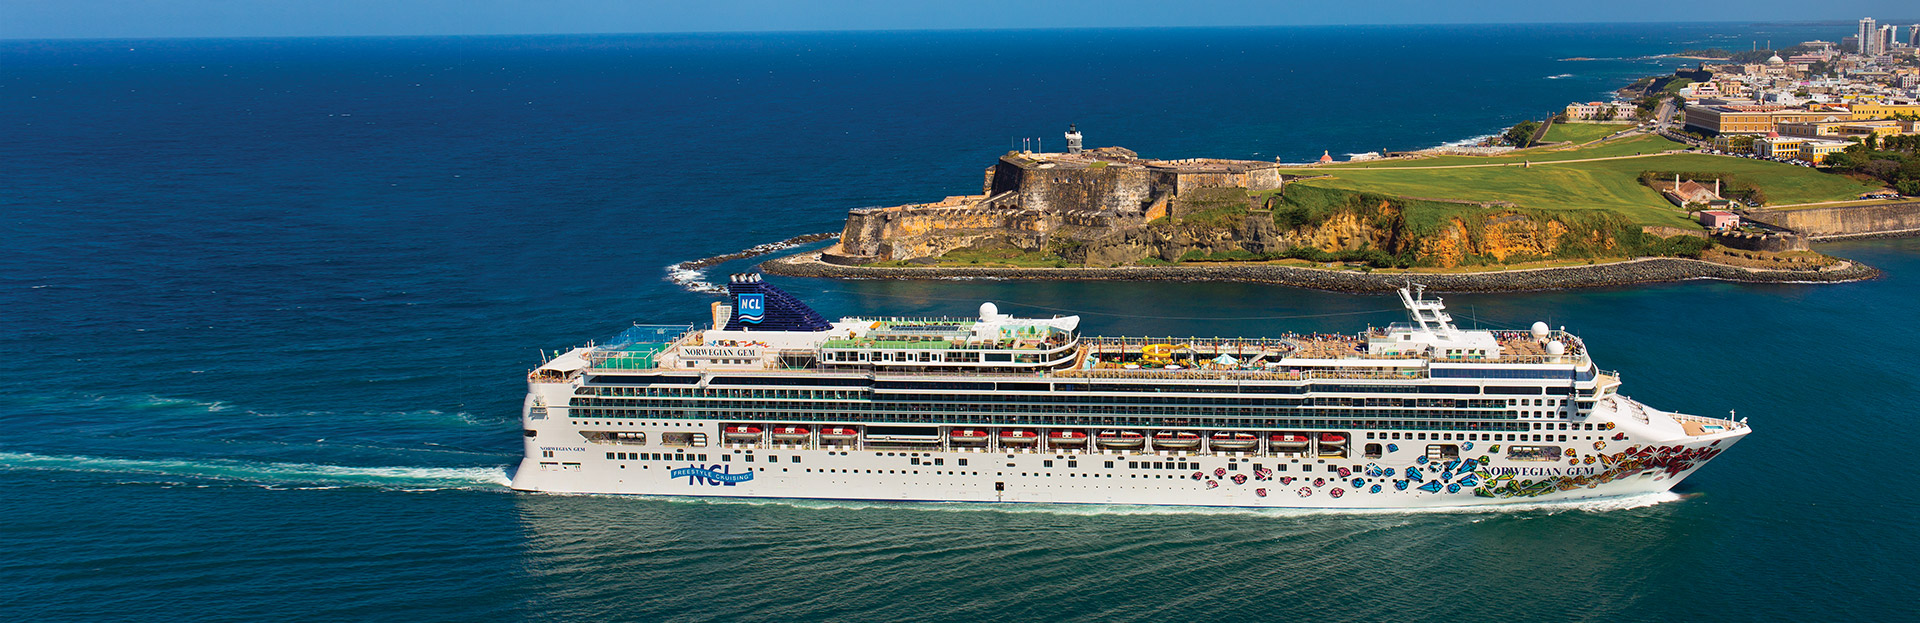 cruises from halifax to caribbean